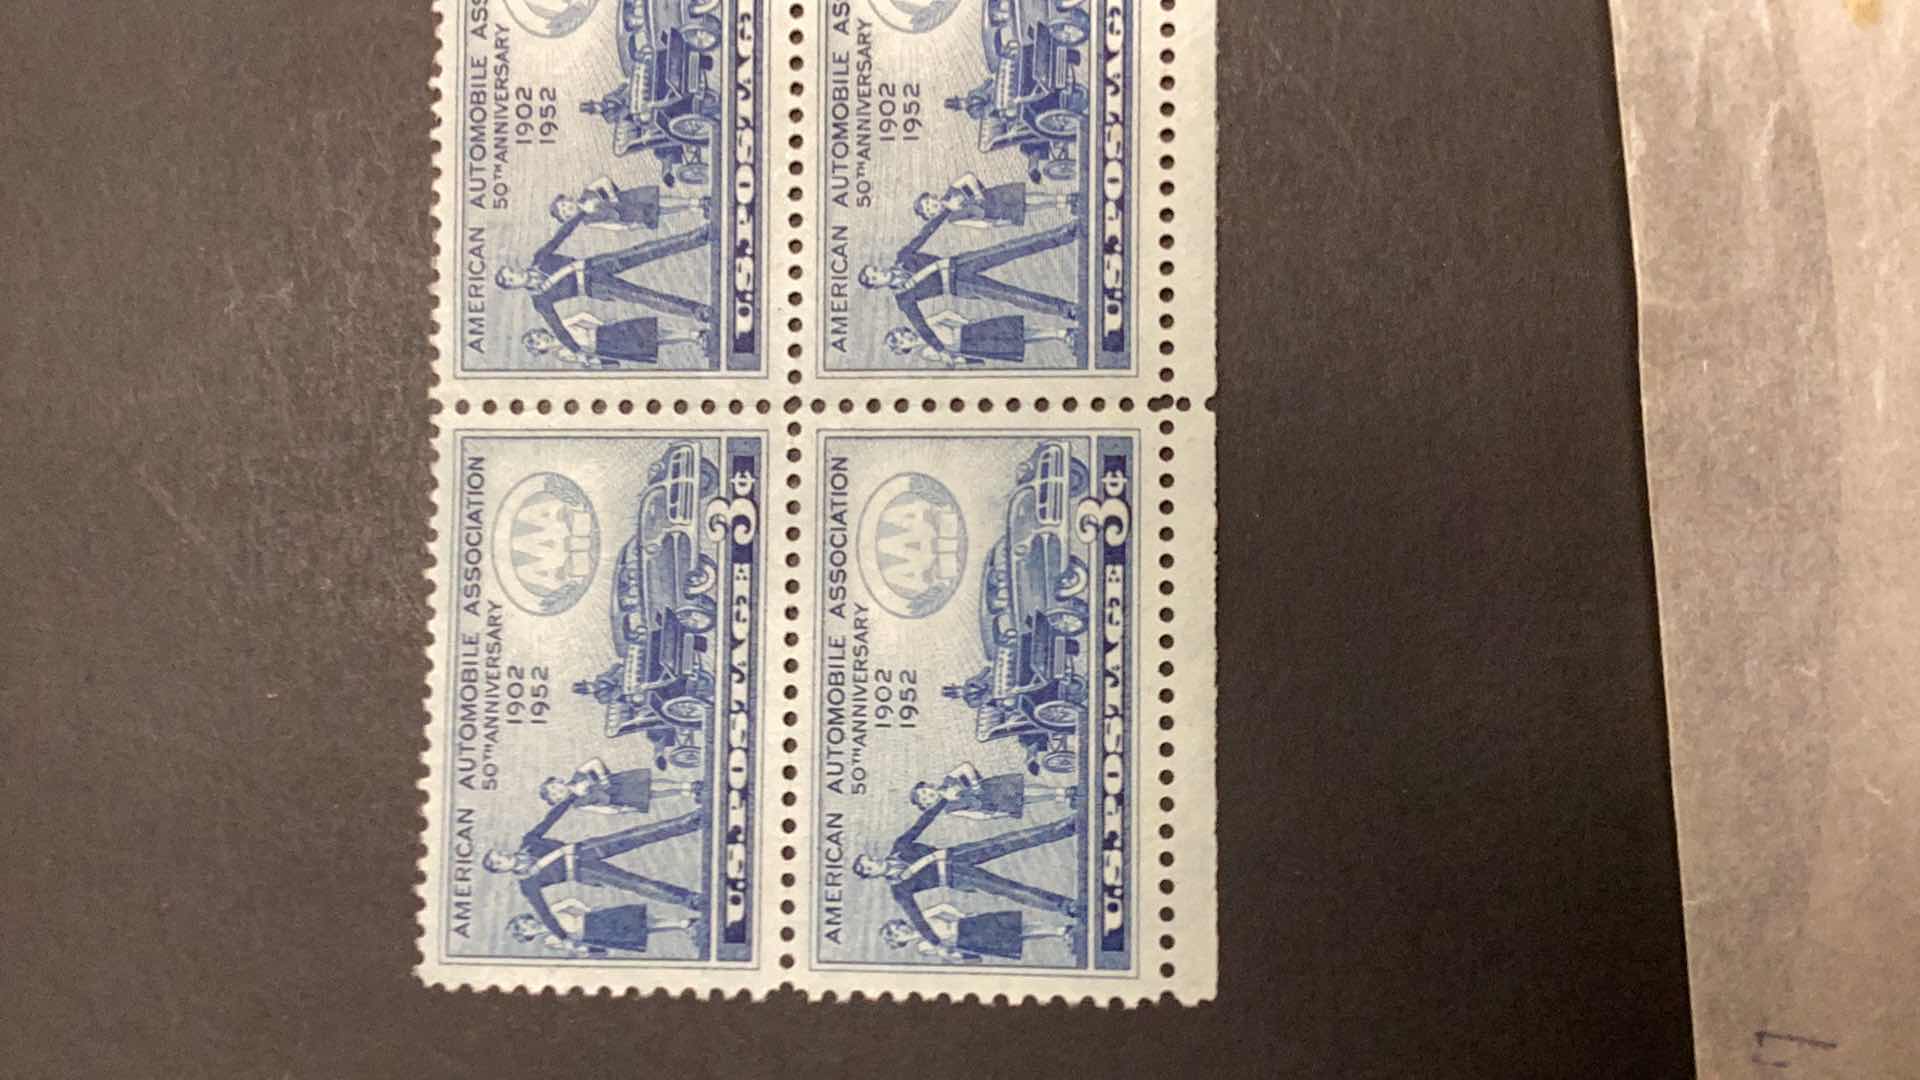 Photo 2 of STAMPS UNITED STATES AAA AMERICAN AUTOMOBILE ASSOCIATION 50TH ANNIVERSARY #1007 1952 BOCK OF 4